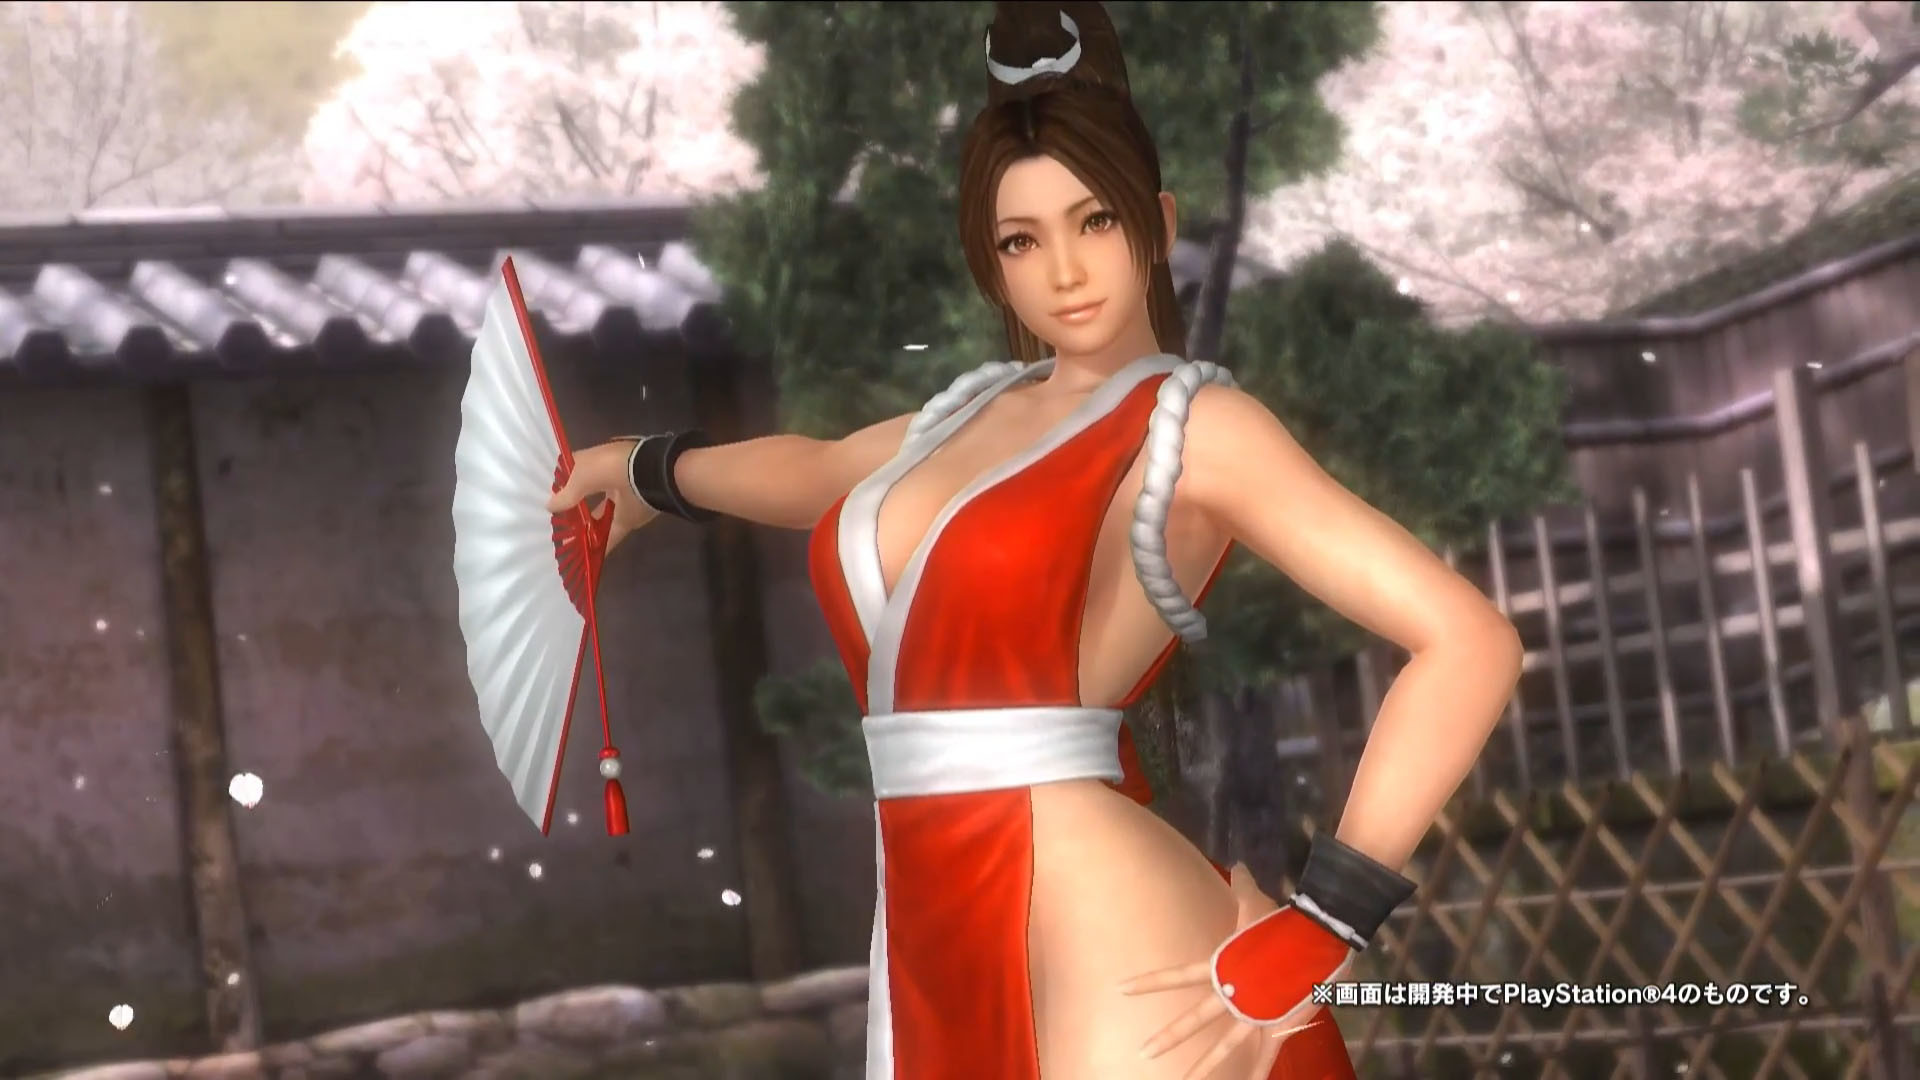 1920x1080 Amazing Dead Or Alive 5 Pictures & Backgrounds